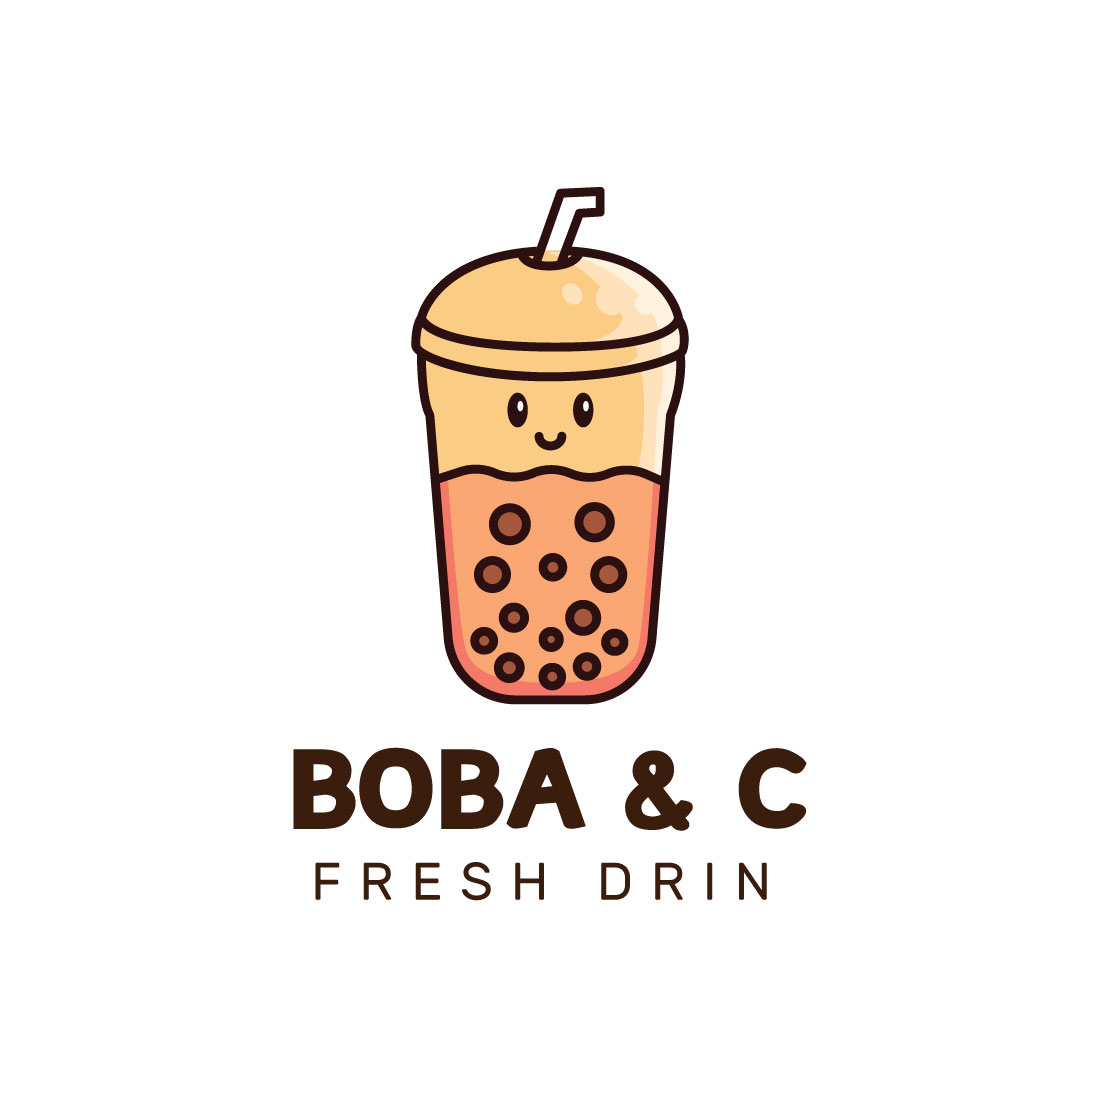 Brown Fun illustrated Bubble Tea Drink Logo preview image.